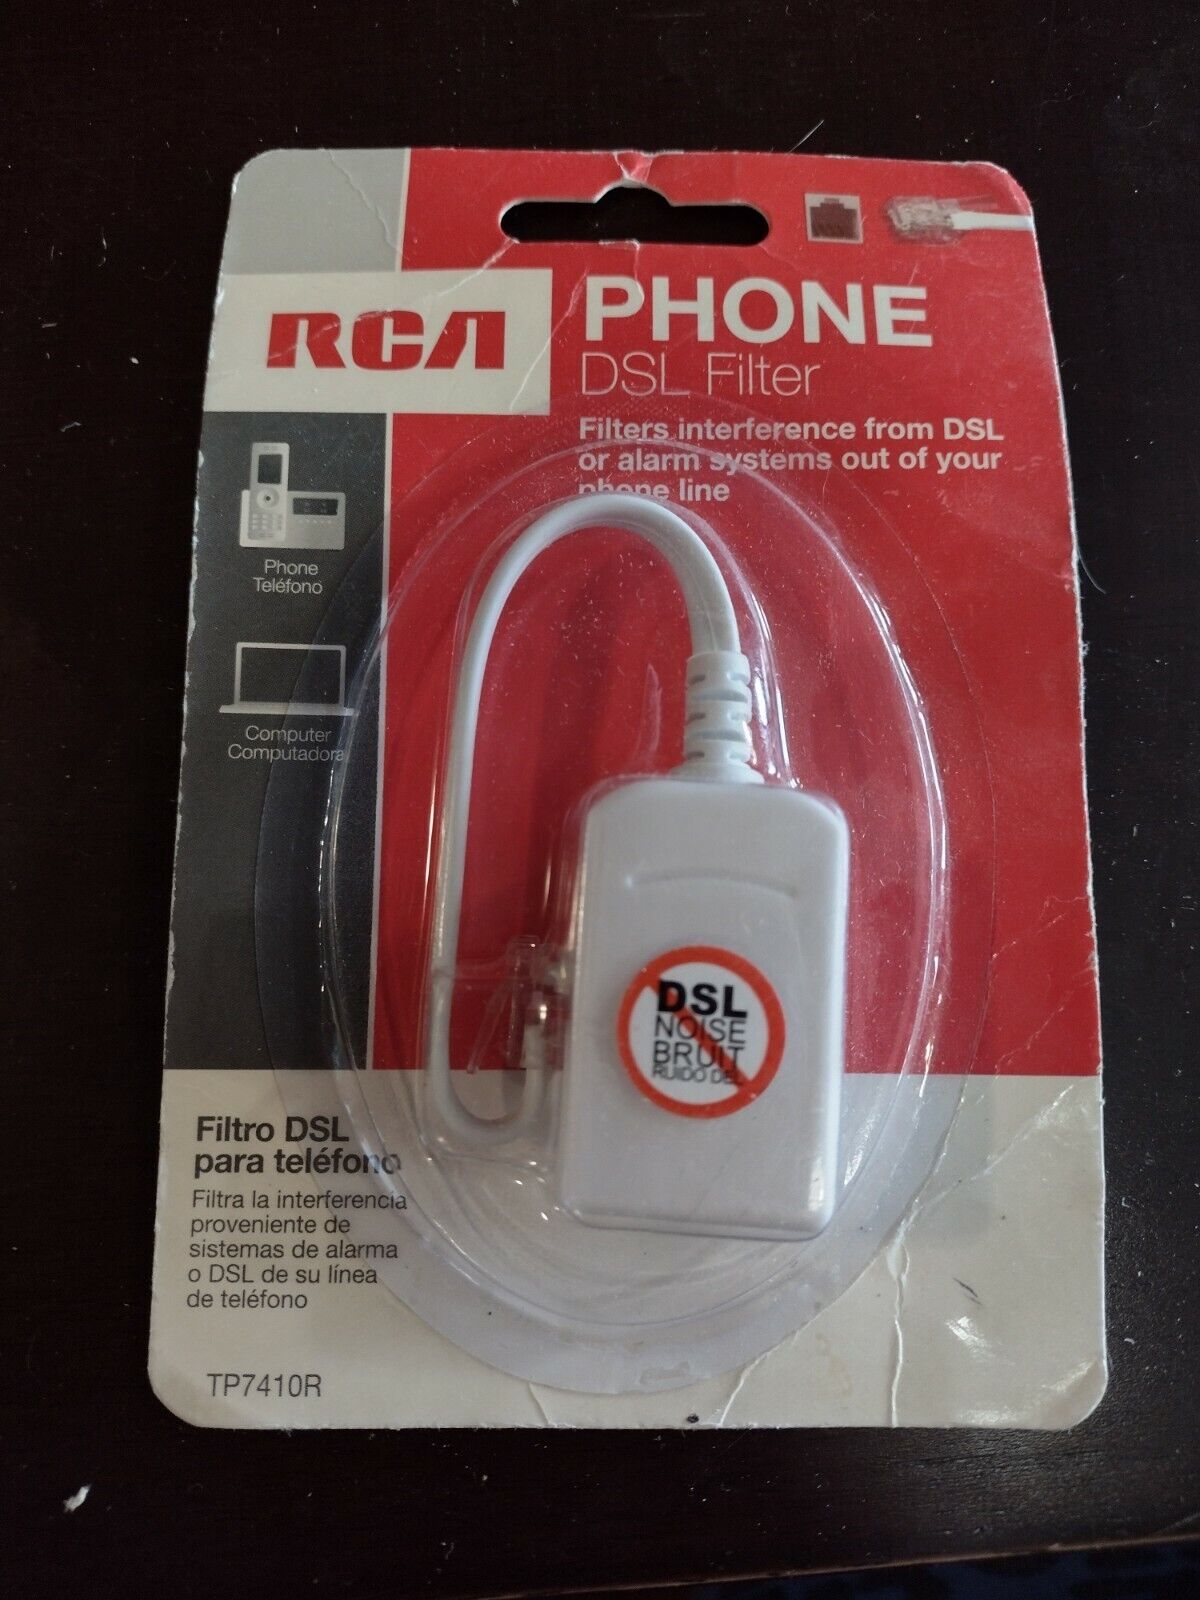 Phone Dsl Filter White Rca Tp7410r - Filter Interference From Dsl/alarms Out